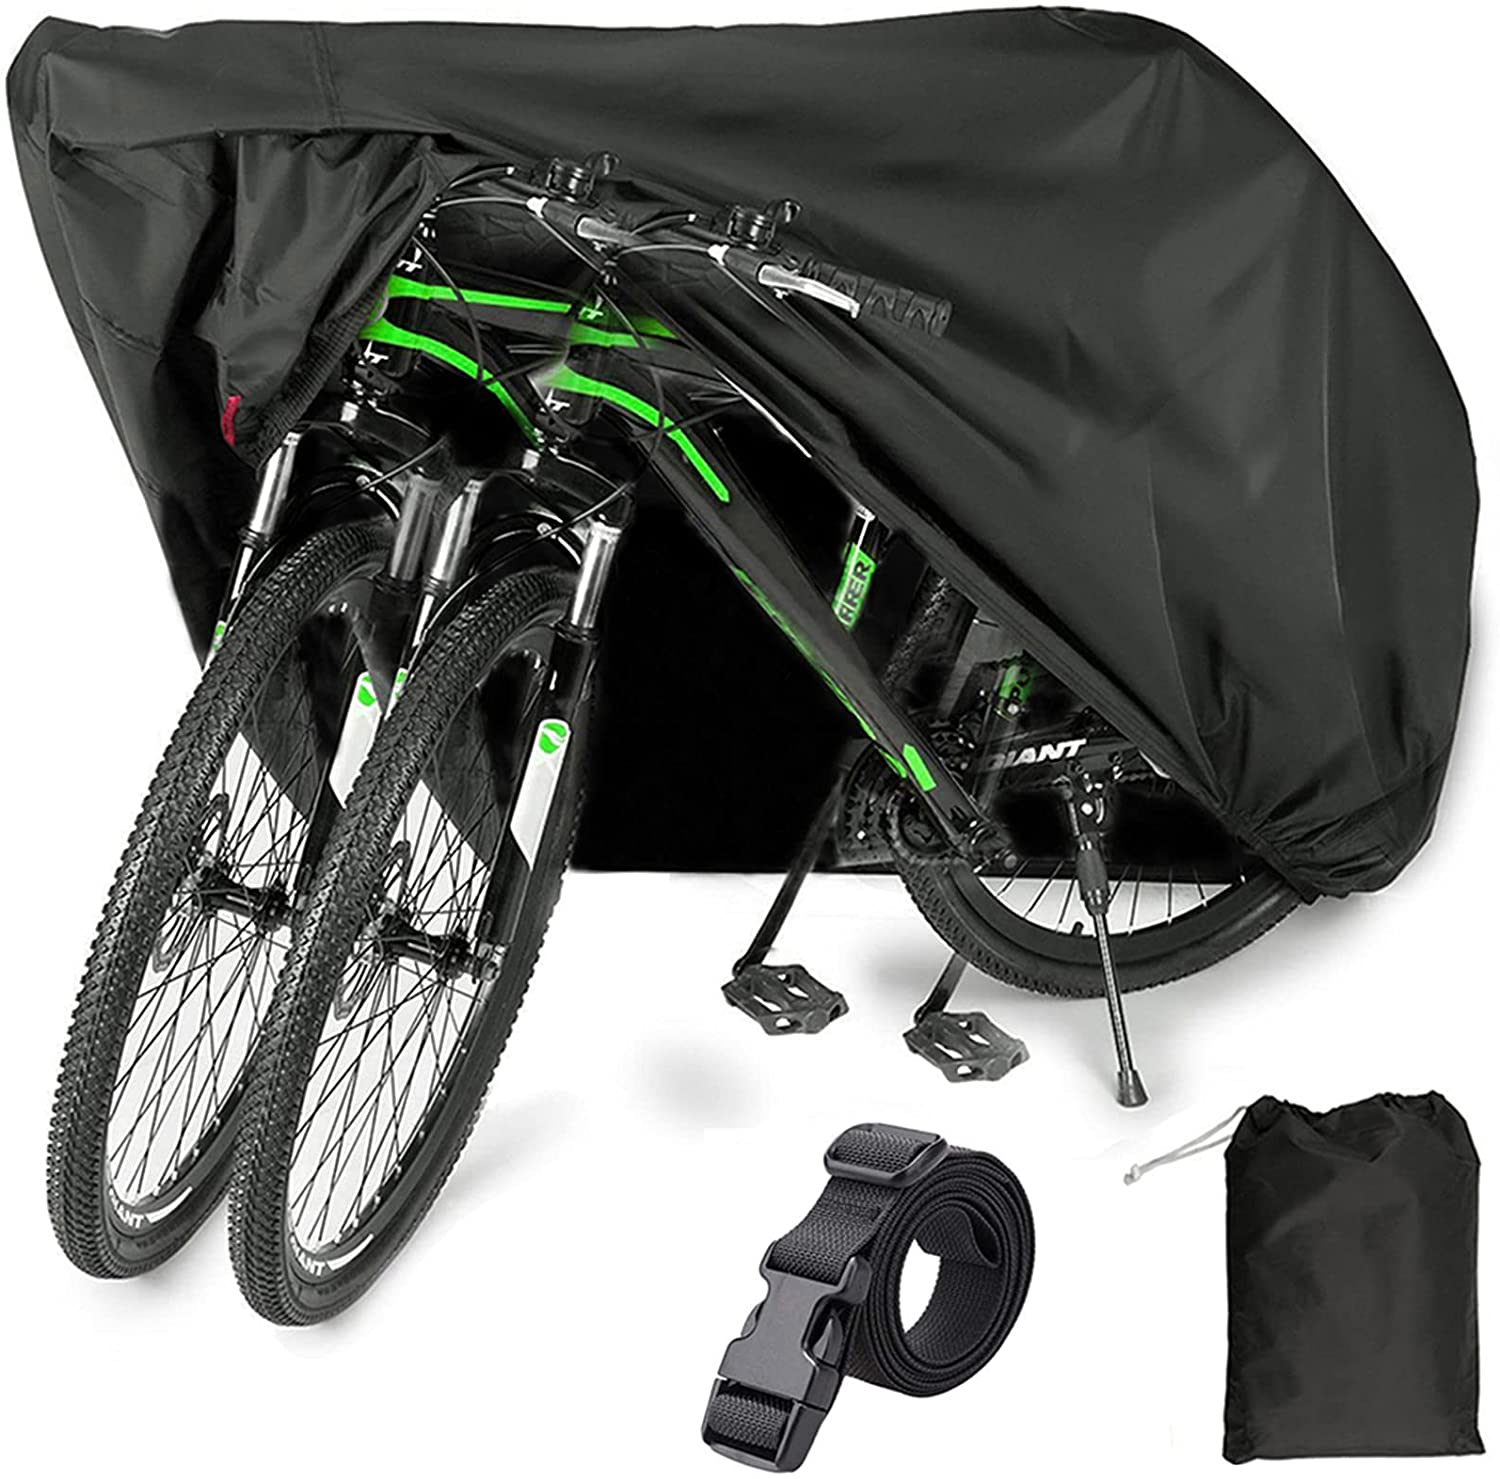 X-Large for 2 Bikes Bike Cover Outdoor Storage Waterproof for 2 or 3 Bikes